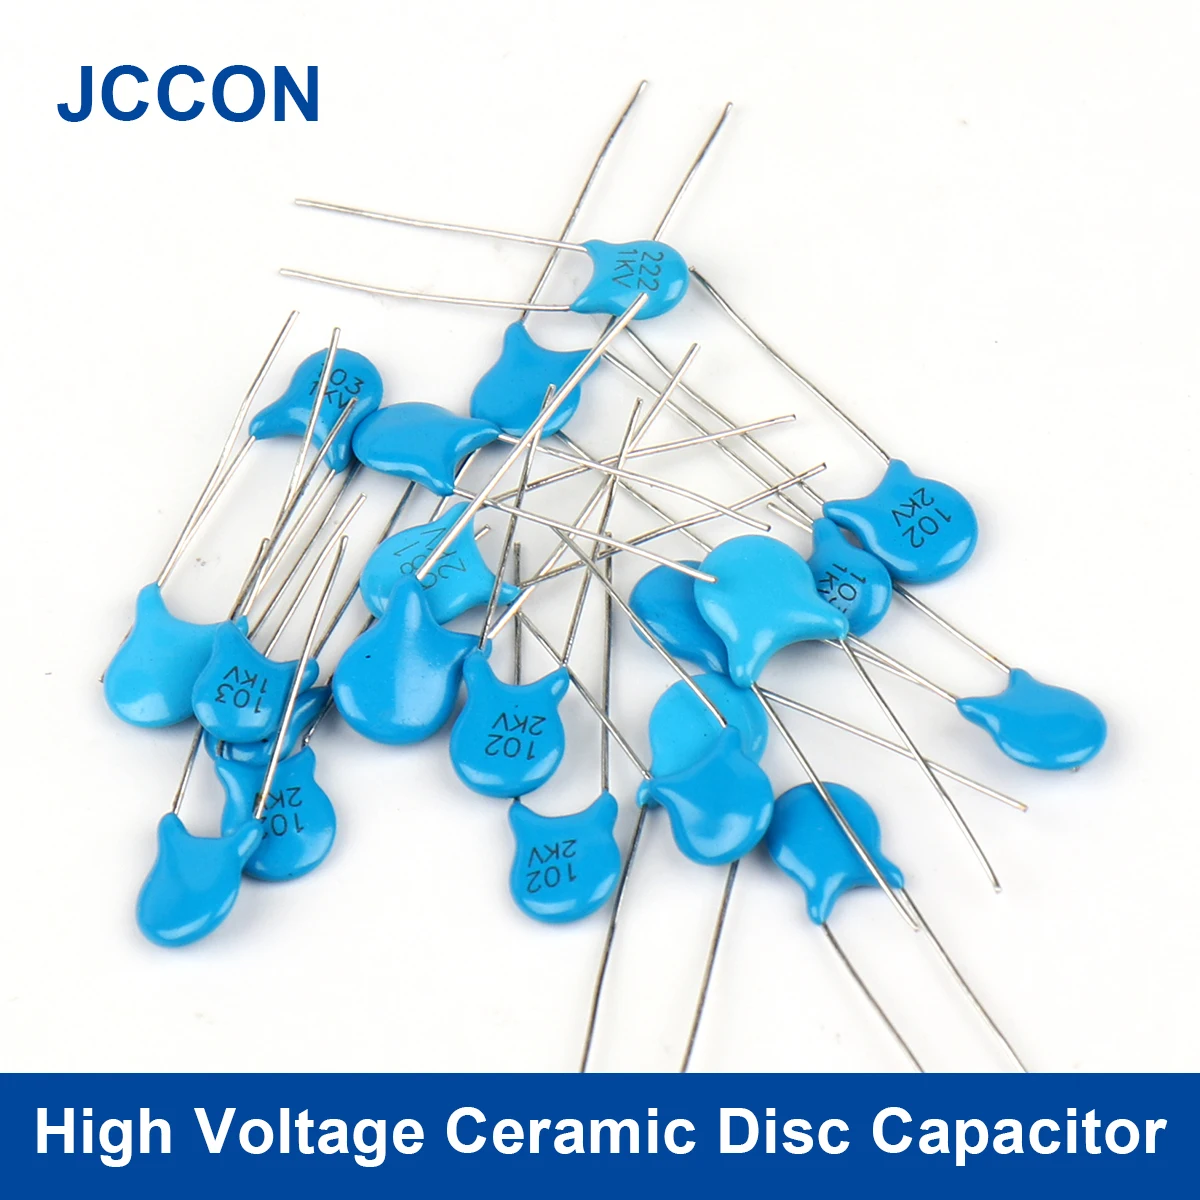 

High Voltage Ceramic Disc Capacitor 103 102 222 471 332 472 681 223 1000pF 2200pF 4700pF 470pF 4.7nF 1nF 10nF 2.2nF 3.3nF 4.7nF